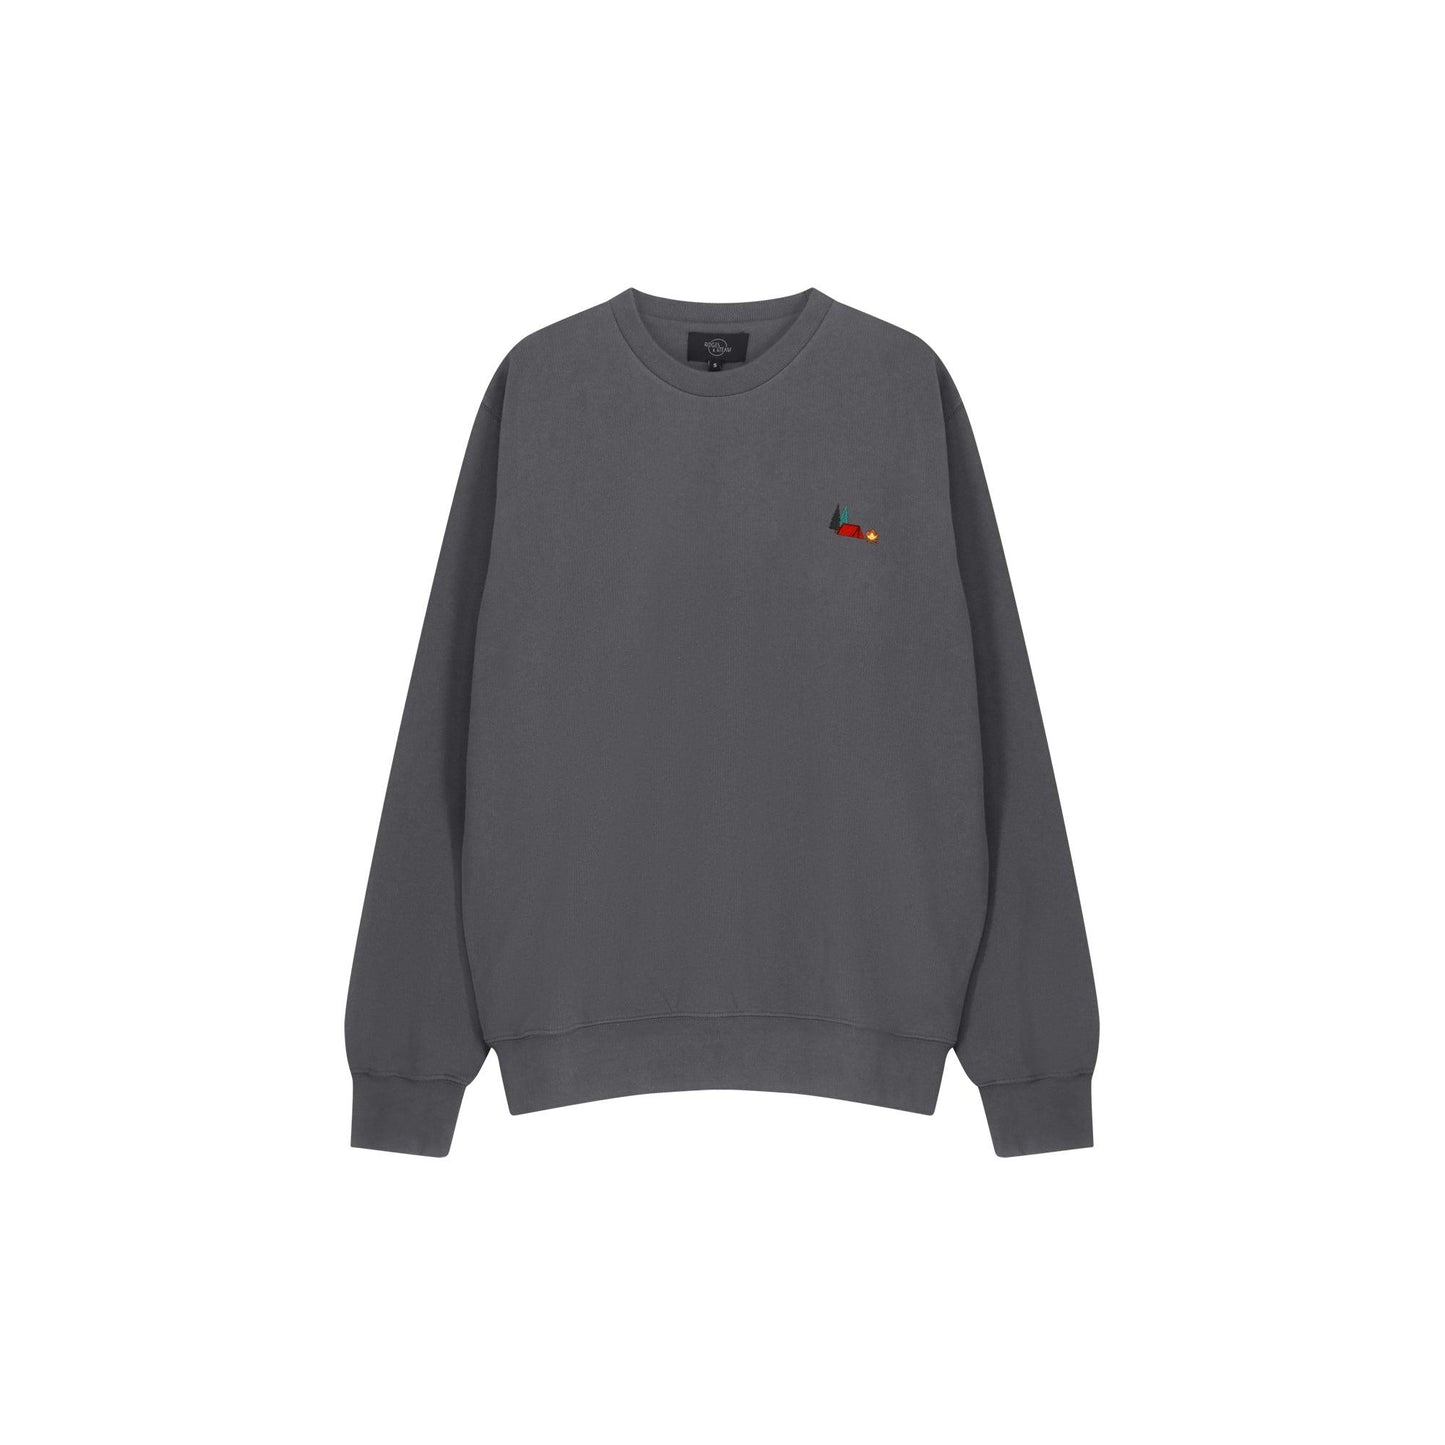 -	Stay comfortable in style with our graphite grey sweater for men. If you like camping, you’ll like our tent embroidery. Made from organic & recycled cotton, it's soft and good for the planet. Free shipping to Belgium and the Netherlands. 